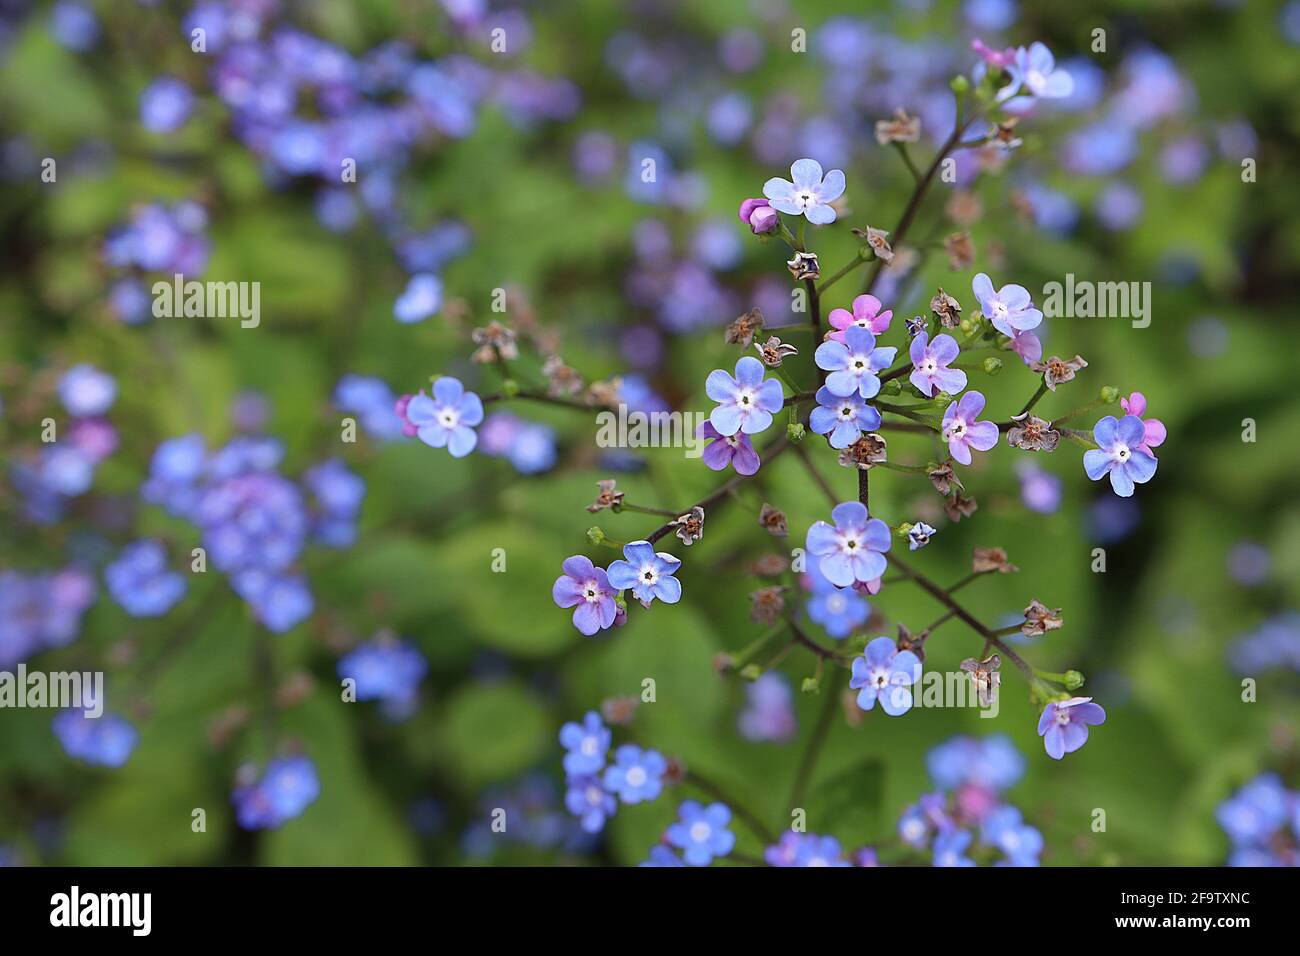 Brunnera macrophylla ‘Green Gold’ Great Forget-me-not Green Gold – sprays of vivid blue flowers with rounded petals, April, England, UK Stock Photo